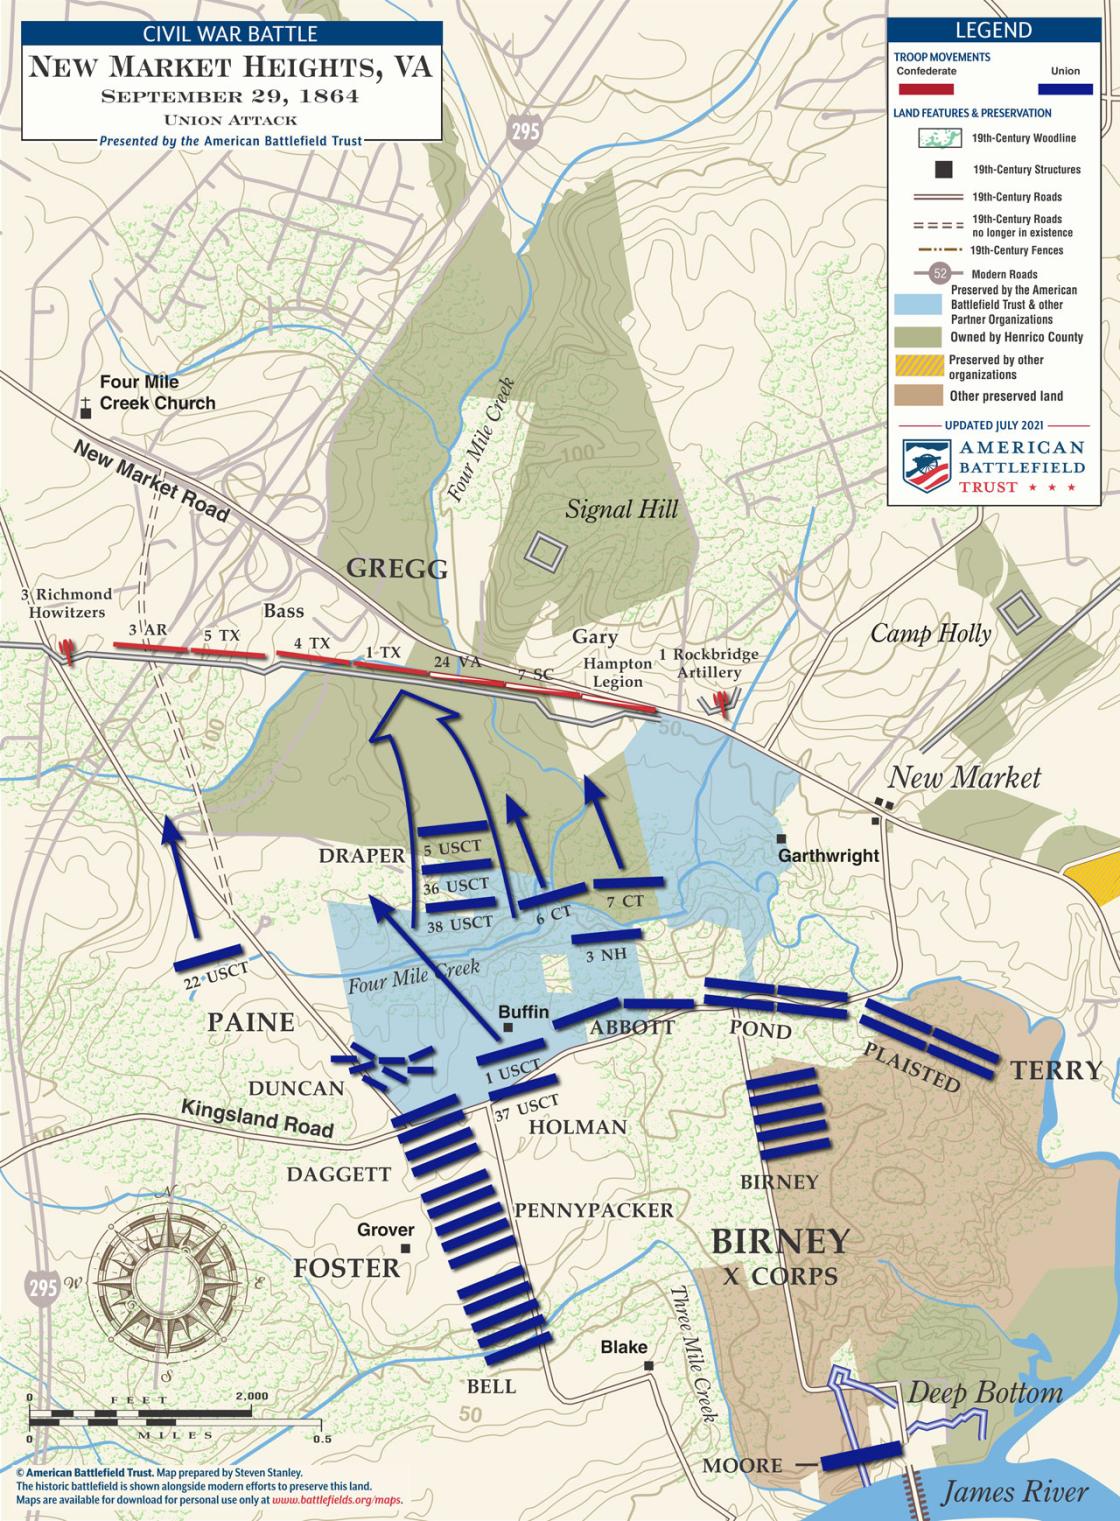 New Market Heights | Union Attack | Sep 29, 1864 (July 2021)